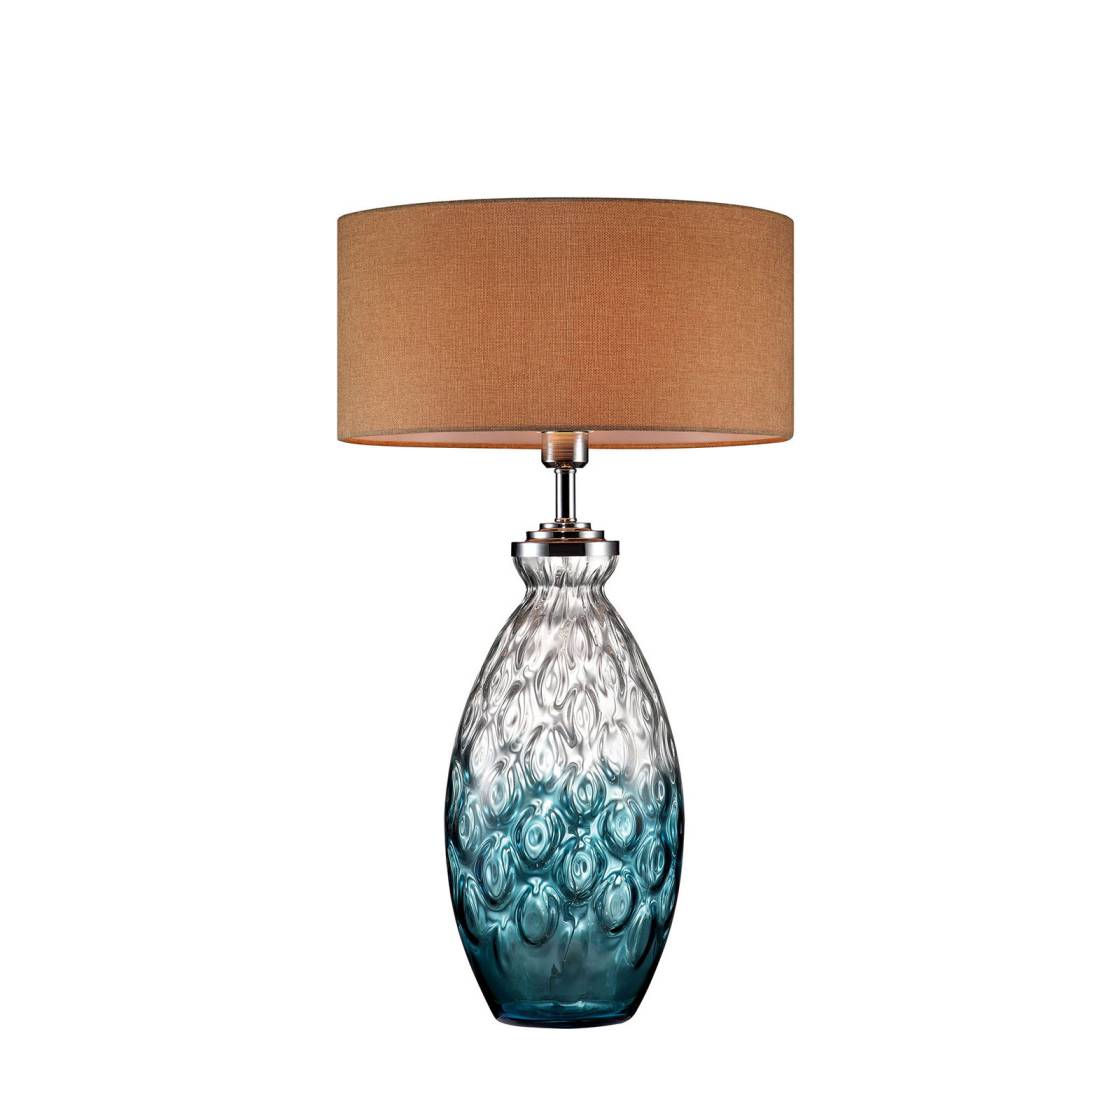 Benzara Table Lamp With Hand Blown Glass Pattern And Bottle Base, Silver And Blue By Benzara Table Lamps BM209020